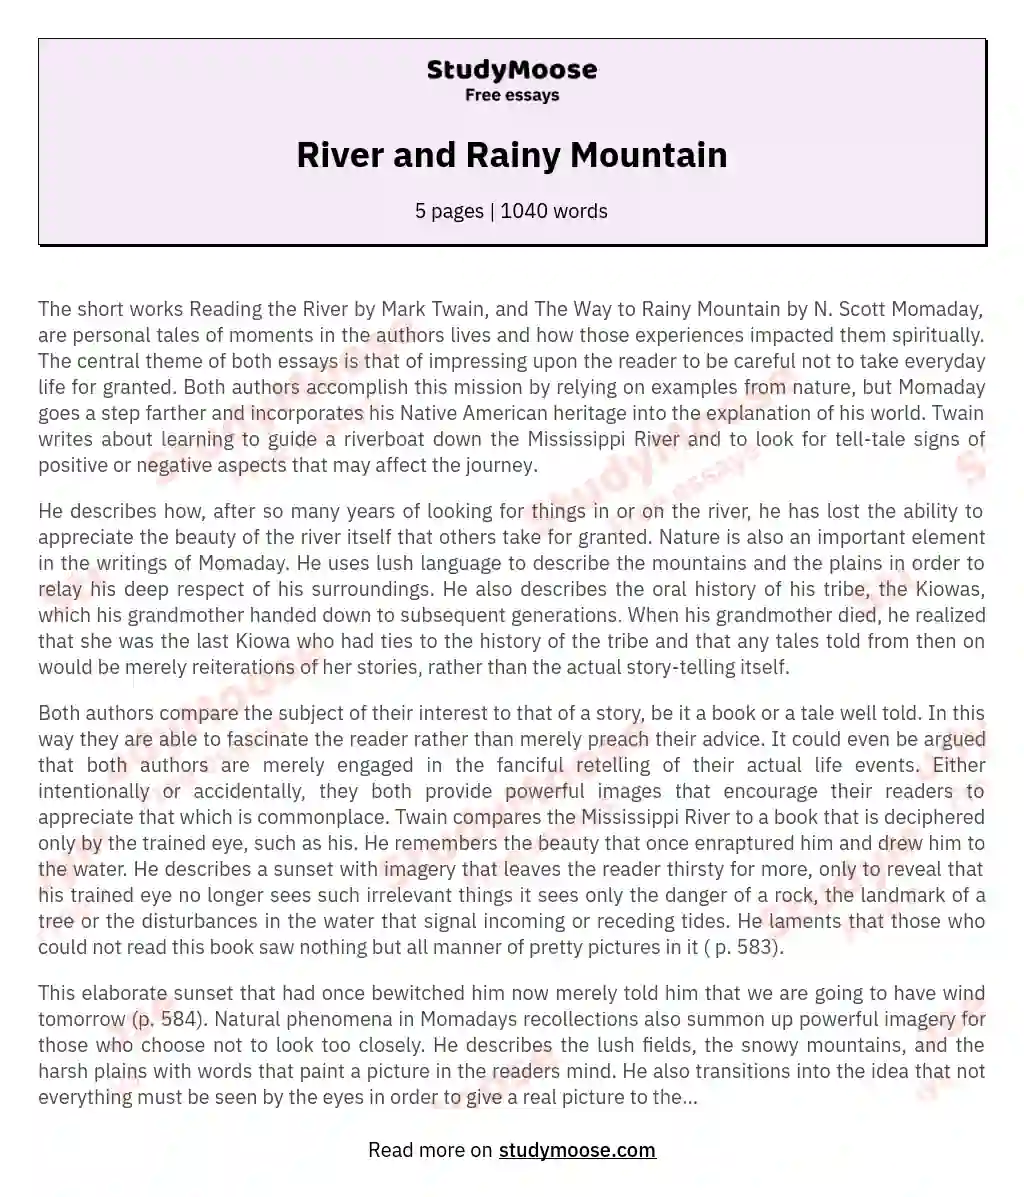 "Reading the River" by Mark Twain, and "The Way to Rainy Mountain" by N. Scott Momaday